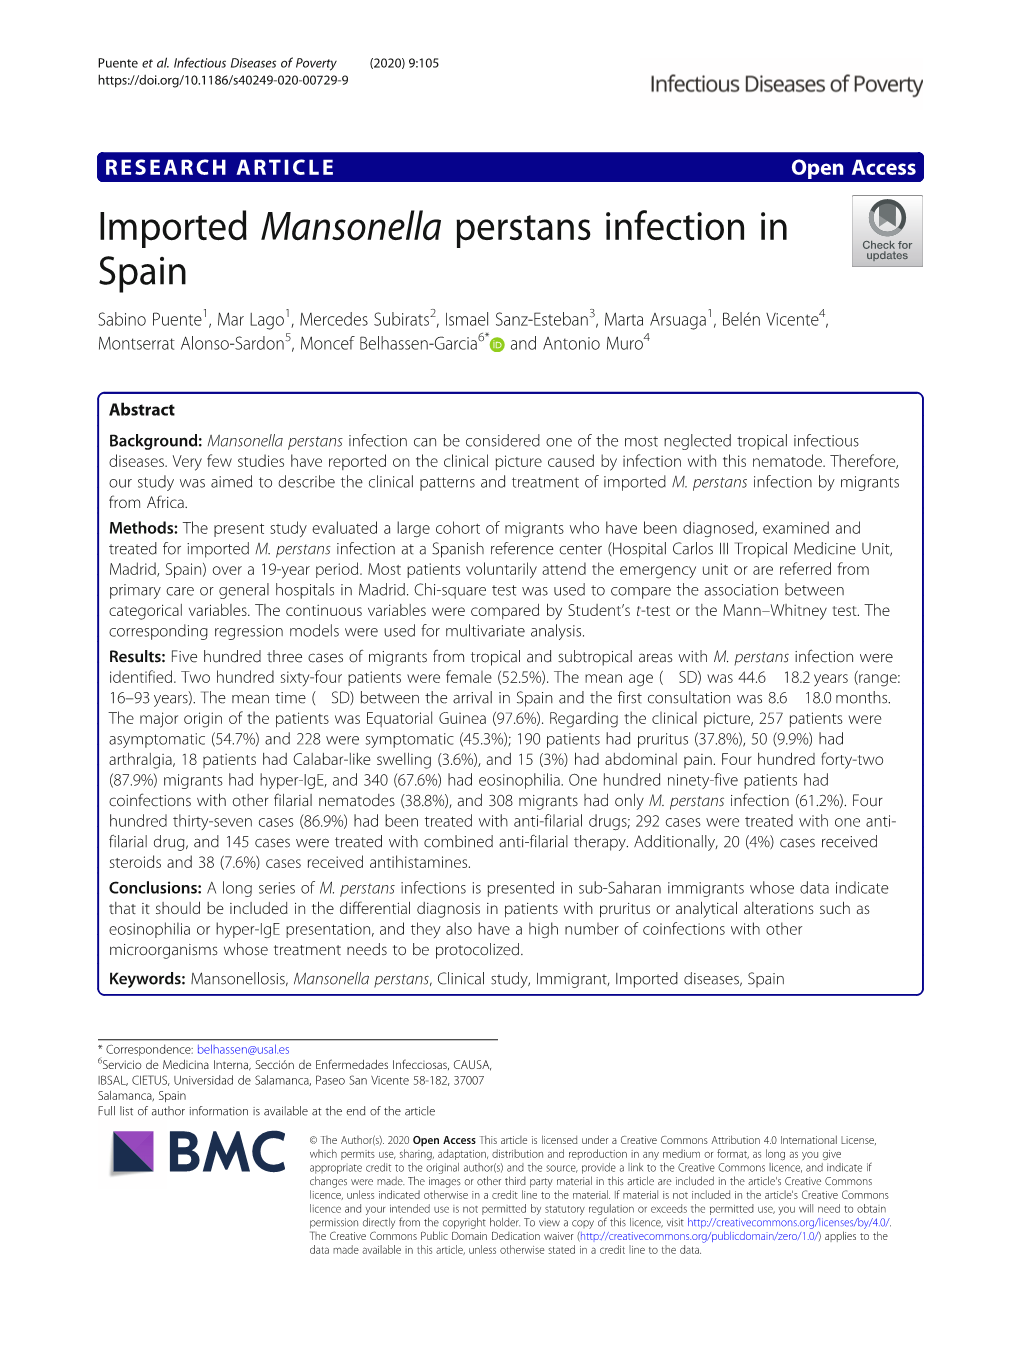 Imported Mansonella Perstans Infection in Spain